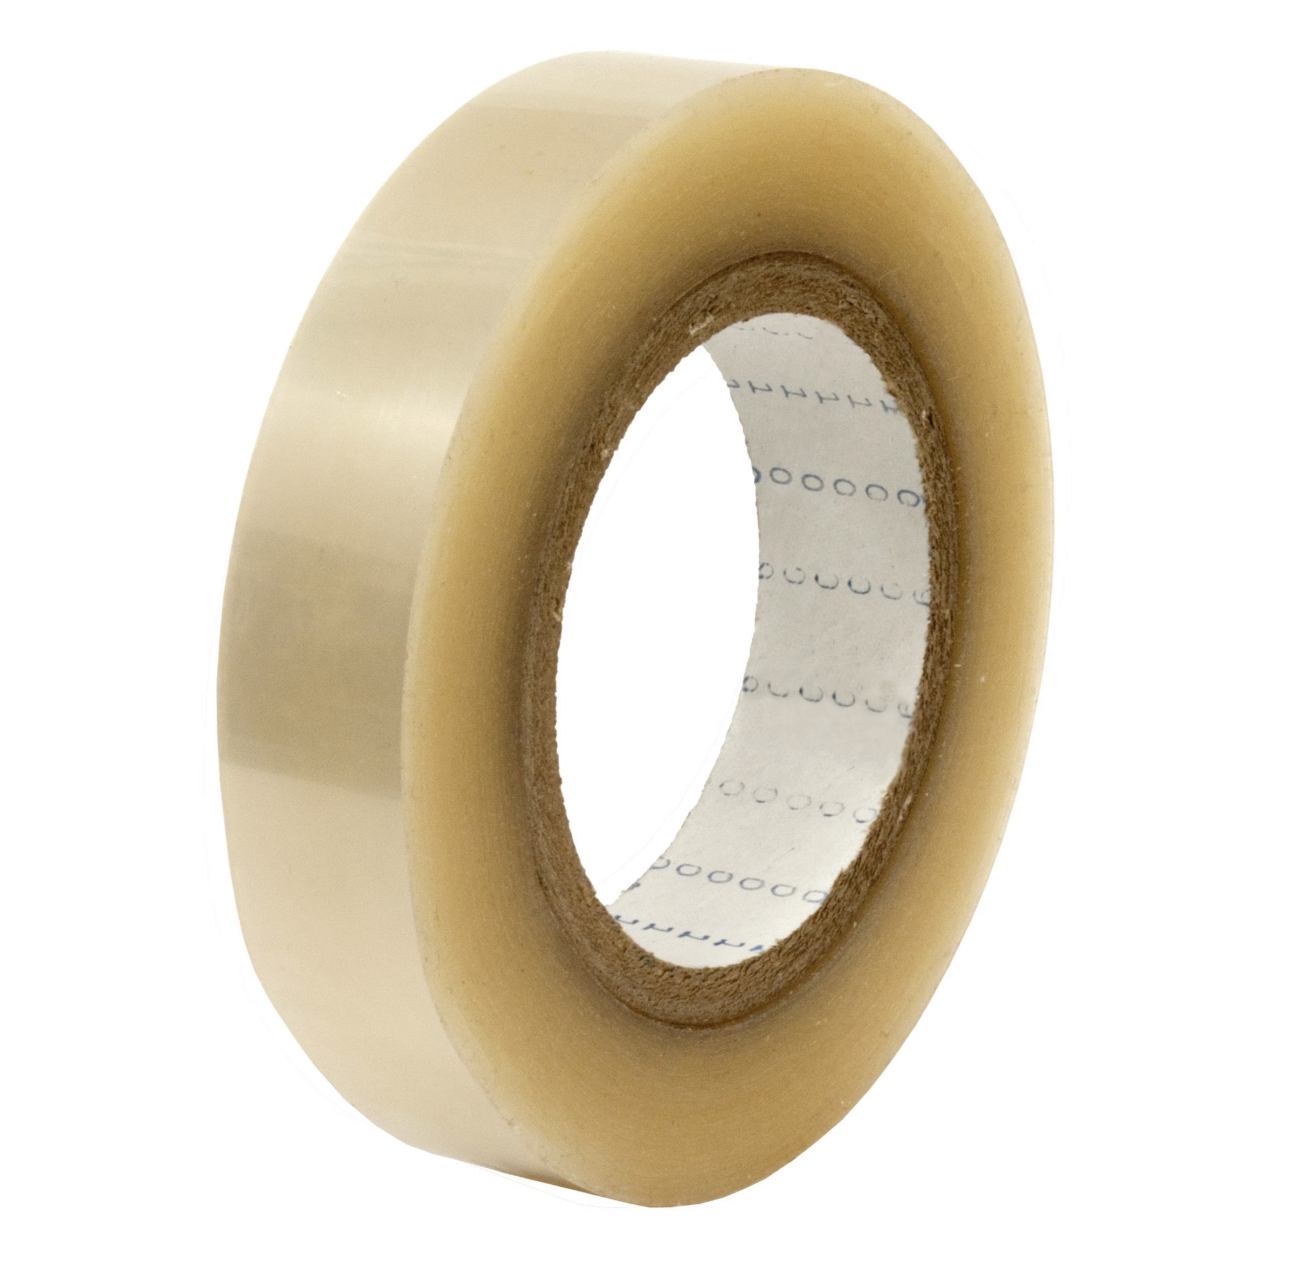 S-K-S dubbelzijdige kleefband met polyester drager 960, transparant, 25 mm x 66 m, siliconen kleefband, 0,085 mm